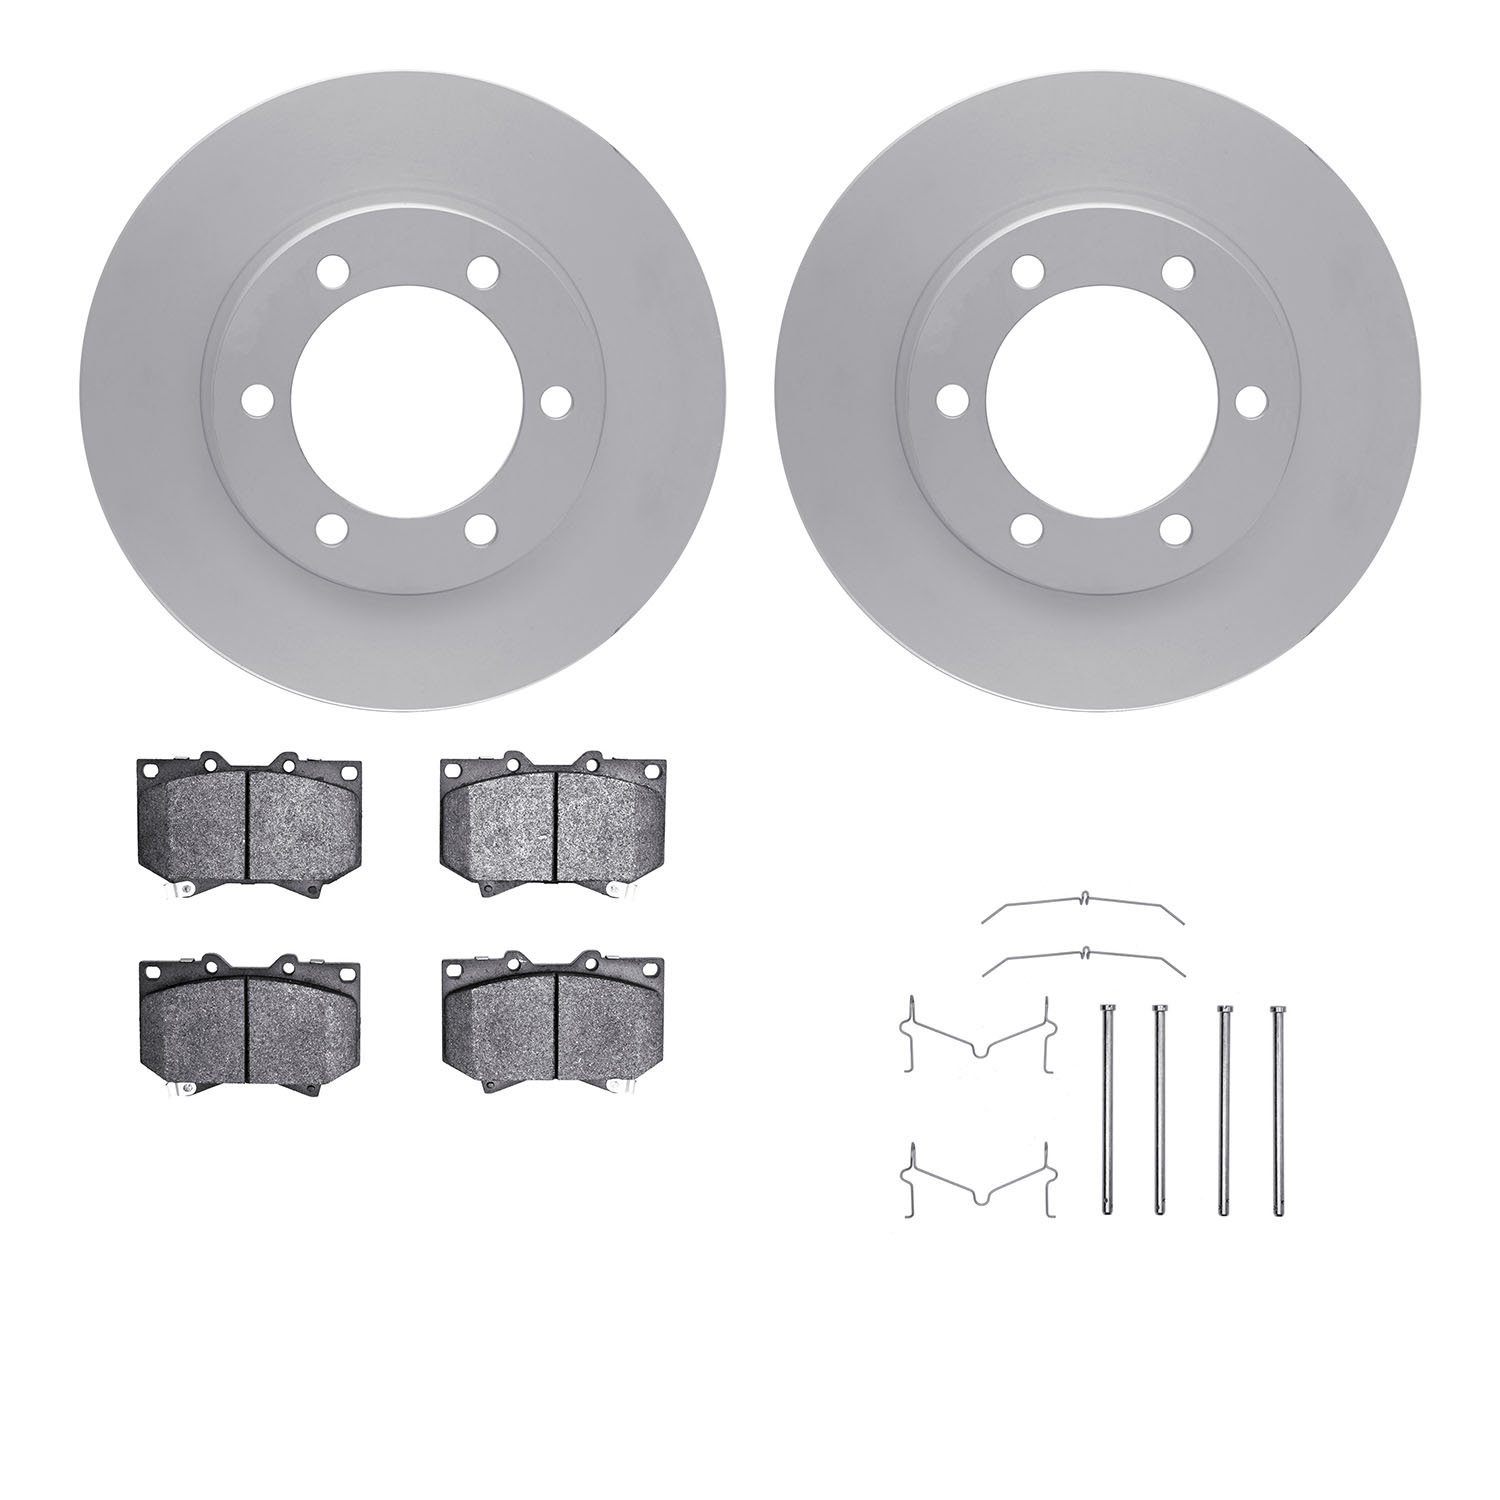 4412-76007 Geospec Brake Rotors with Ultimate-Duty Brake Pads & Hardware, 2000-2002 Lexus/Toyota/Scion, Position: Front